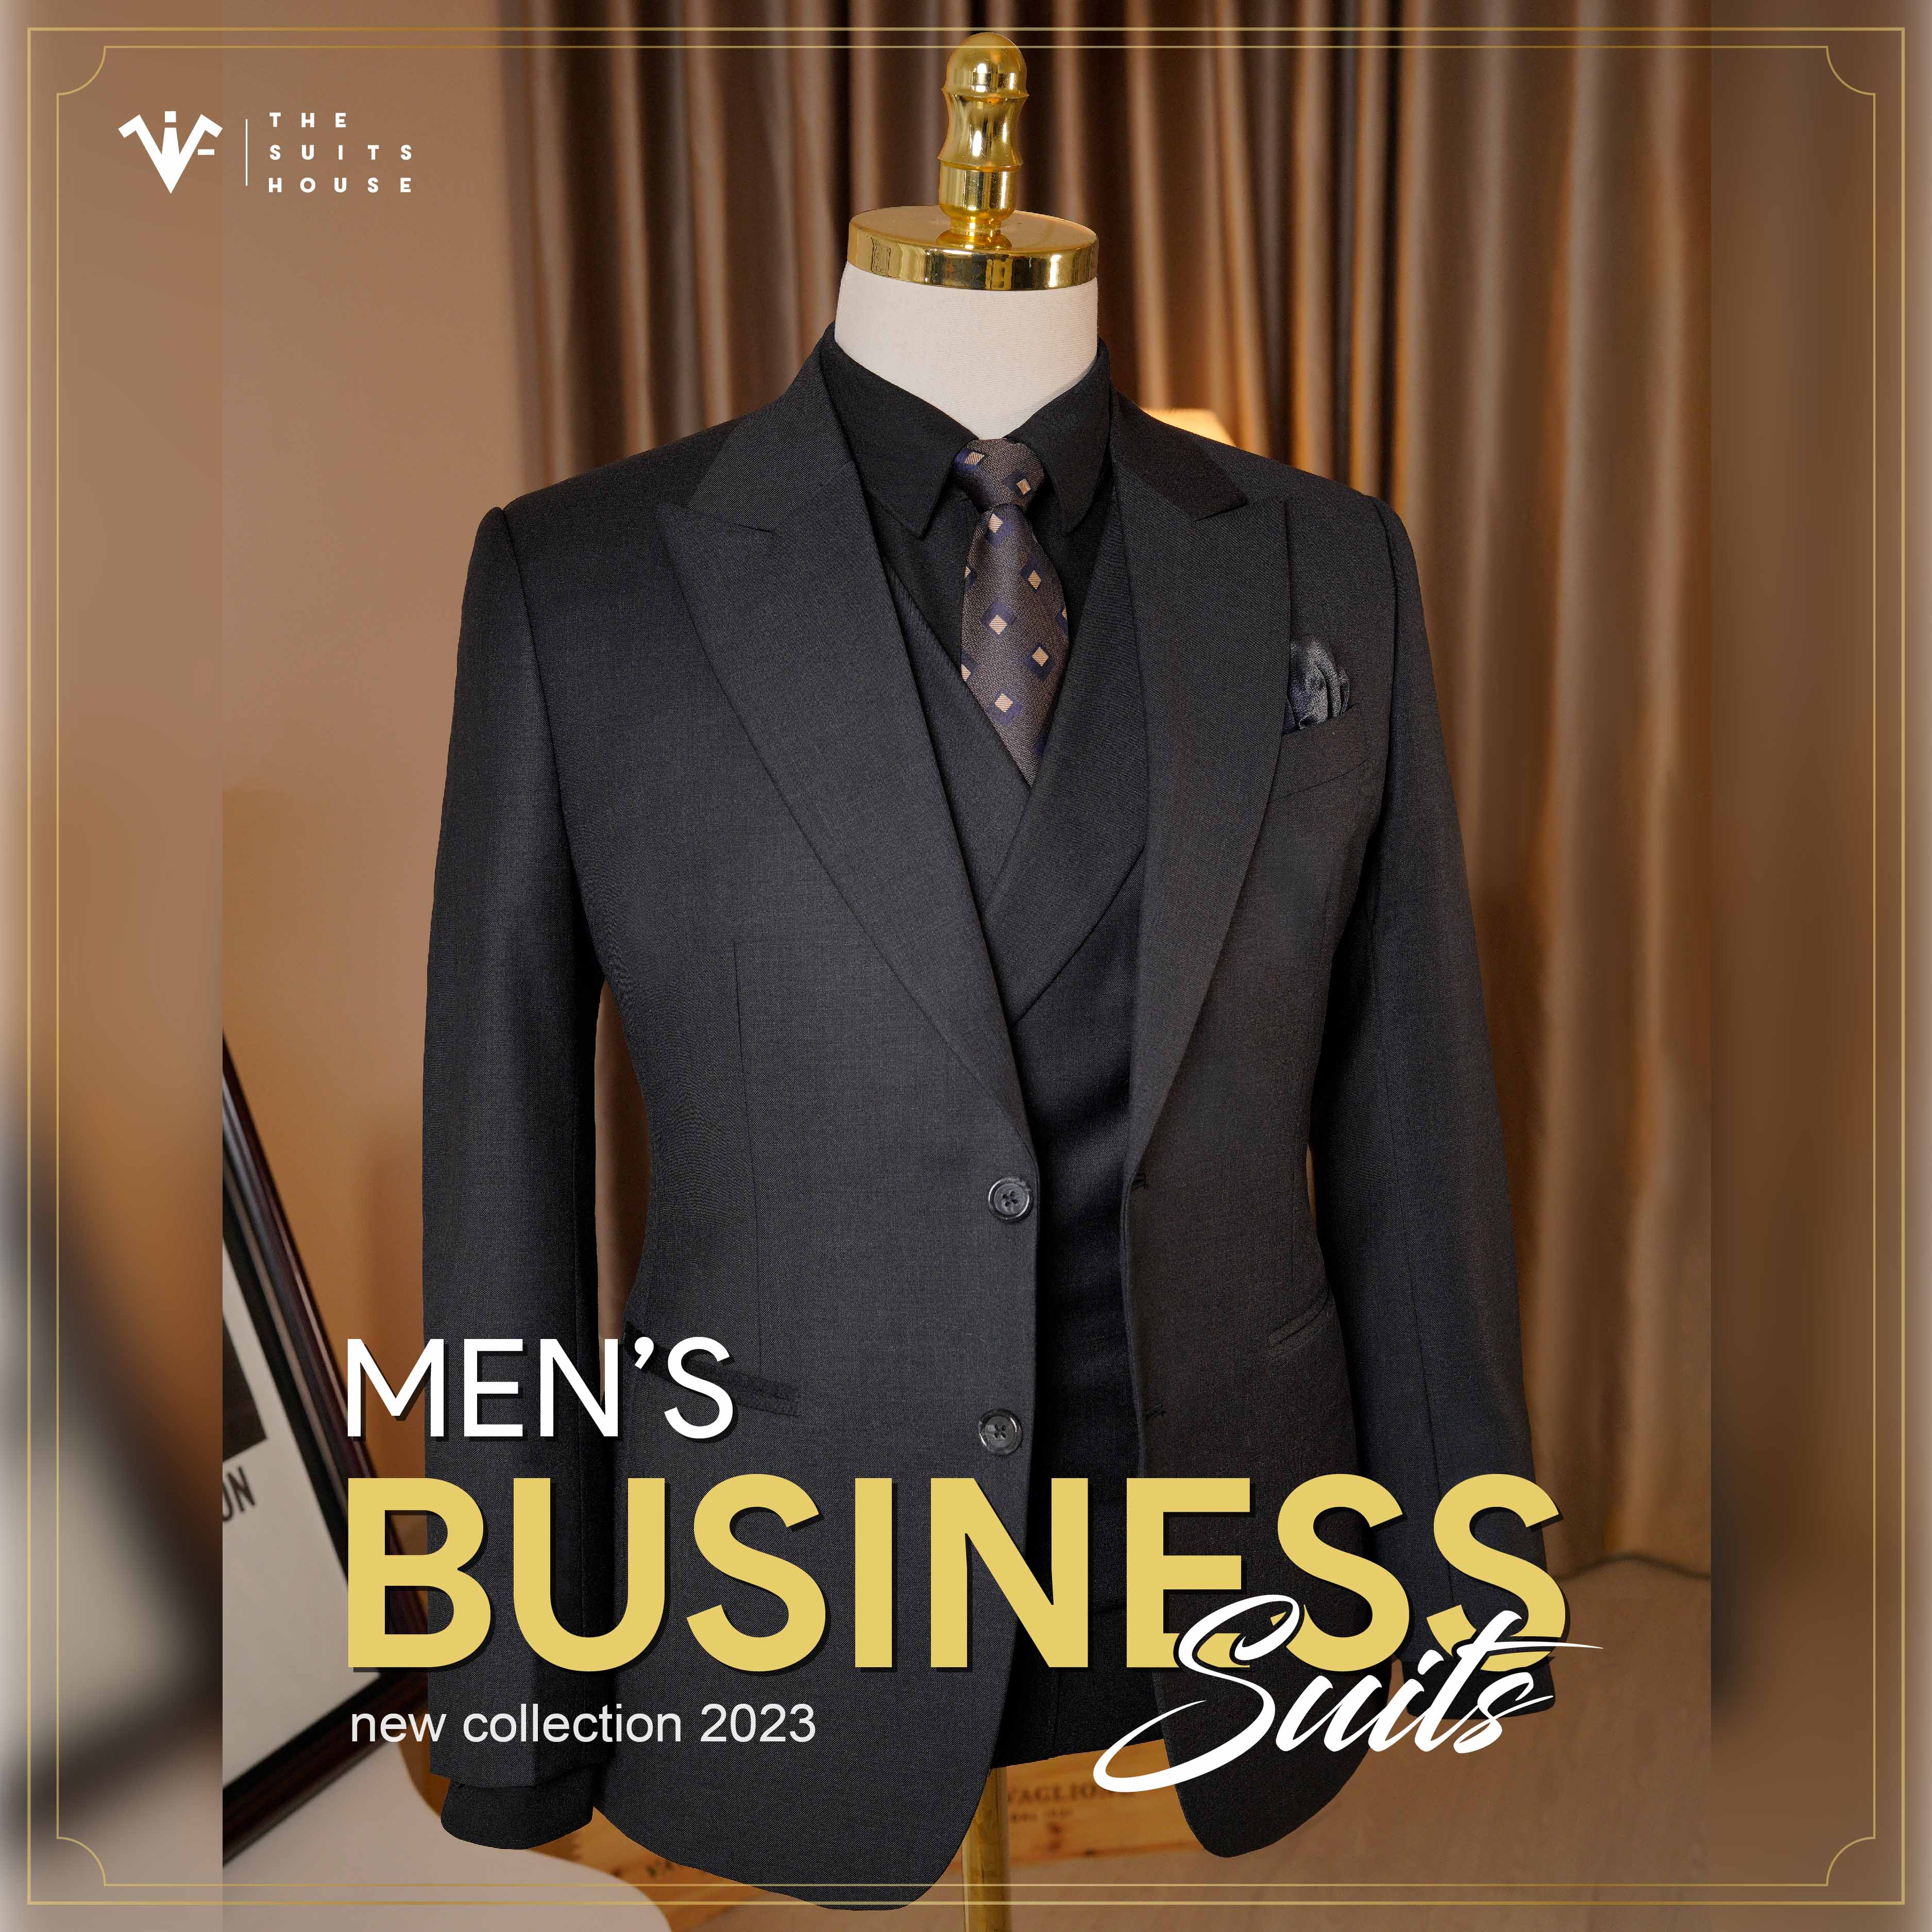 [New Collection] Men's Business Suits